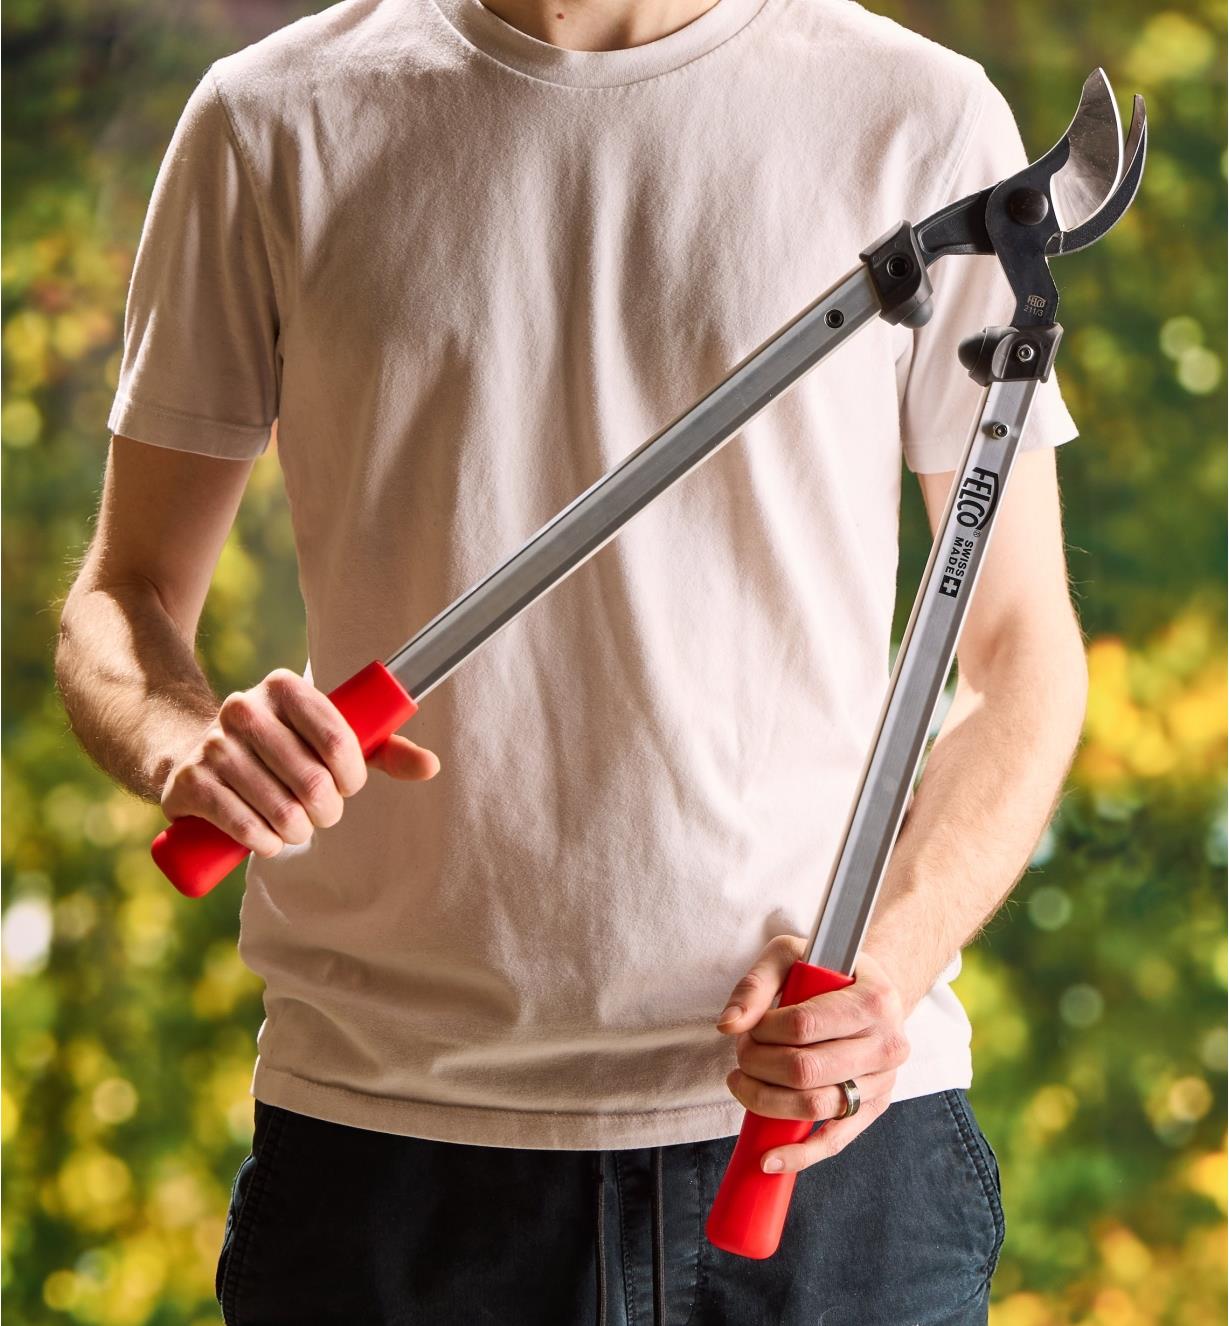 A gardener holds the Felco #211 loppers upright